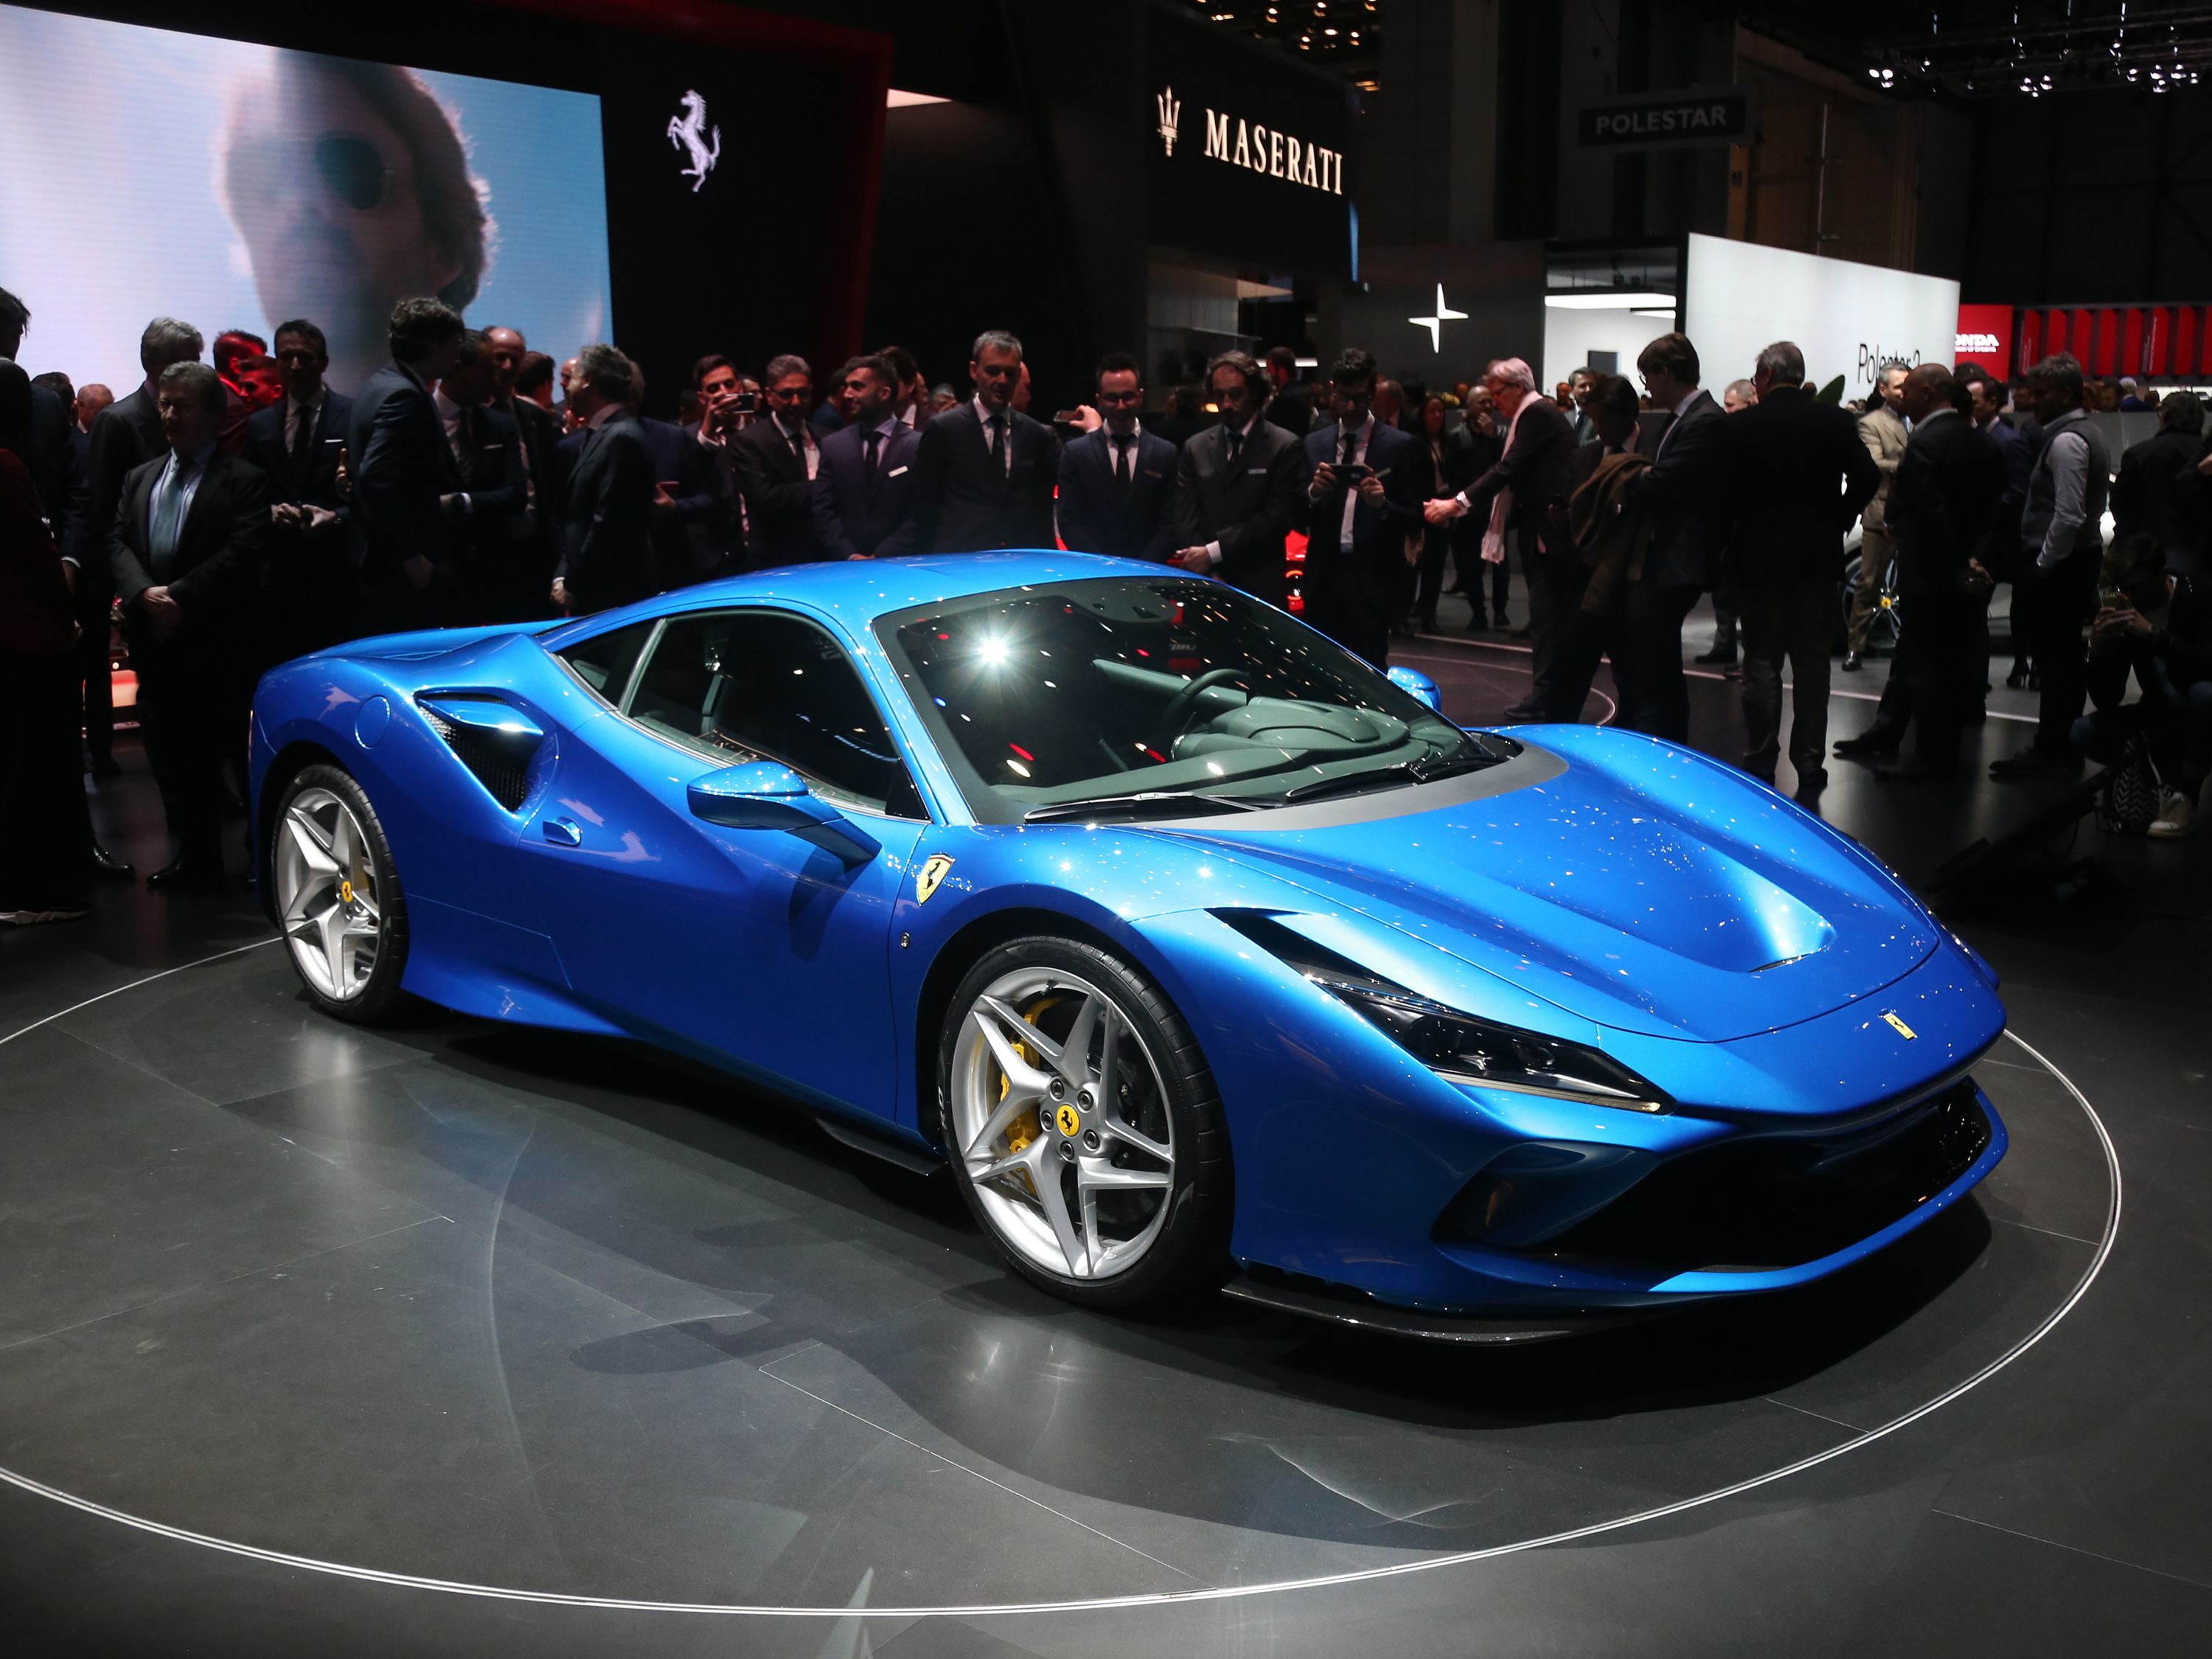 Ferrari 488GTB review: Here's what 'world class' actually means